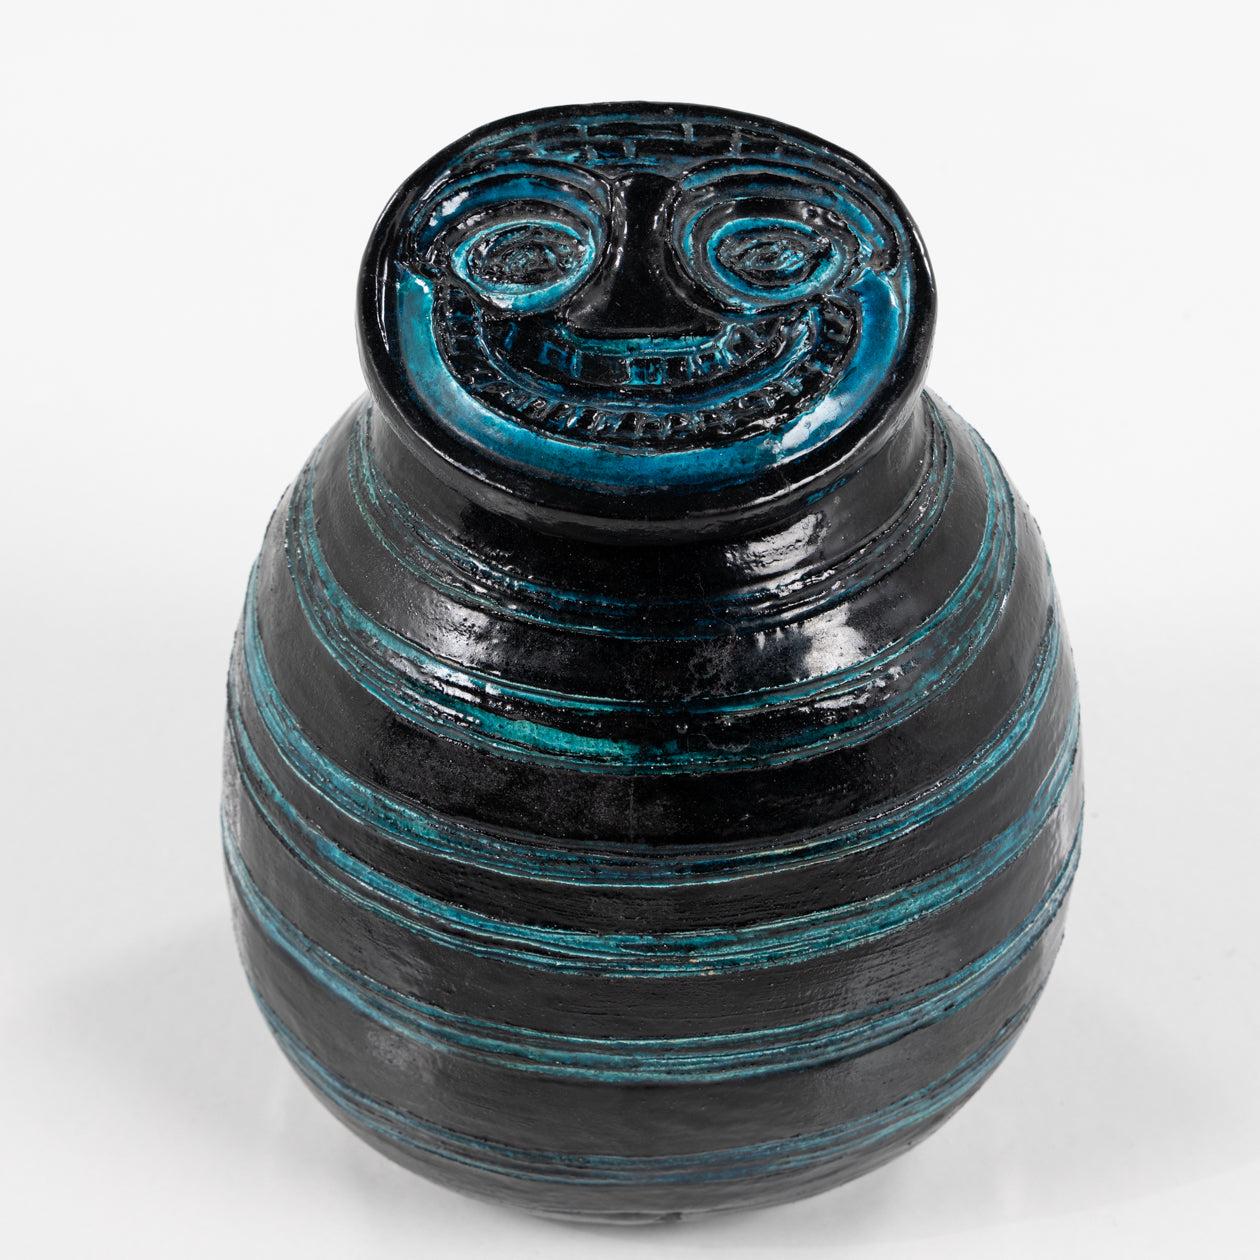 Unique earthenware lidded jar with incisions and turquoise blue and black glaze. Signed 'Weggerby 62'.